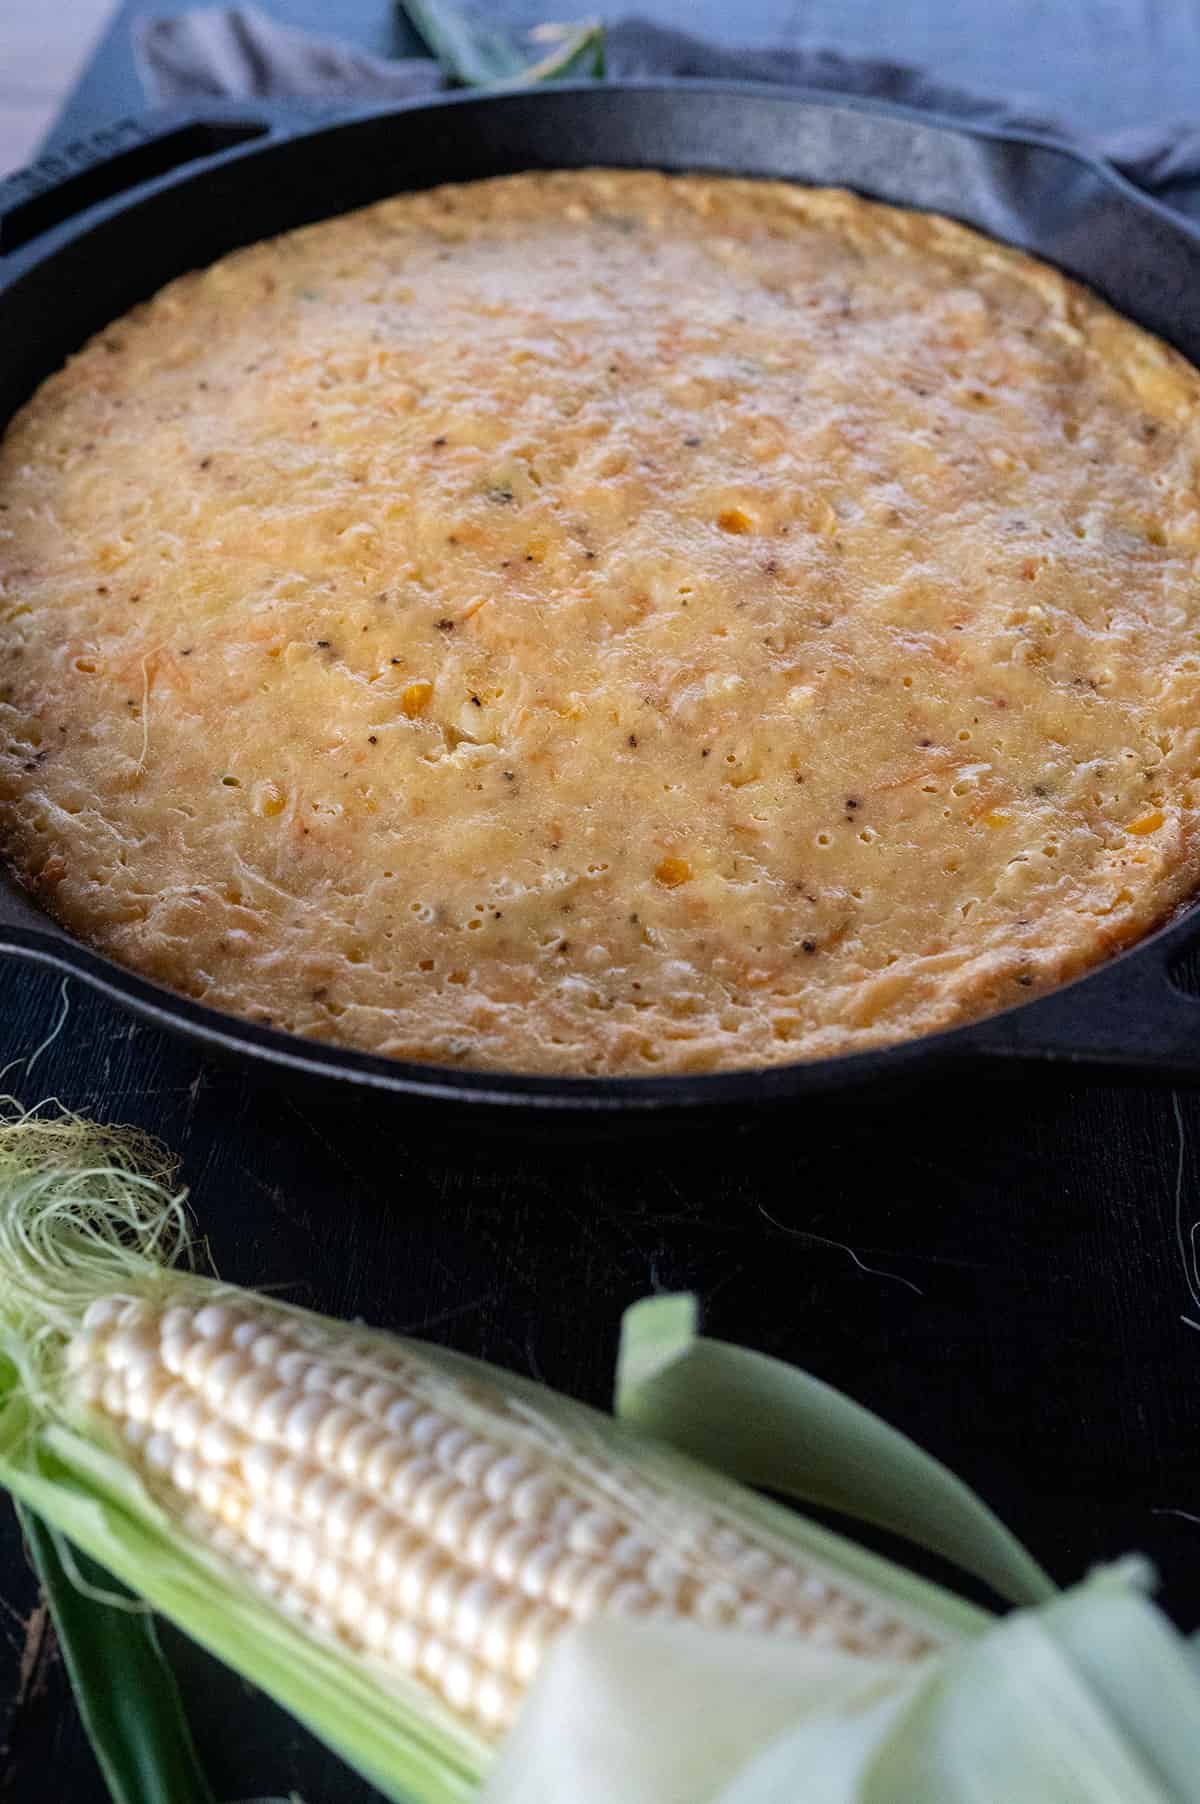 Smoked corn pudding casserole in skillet.